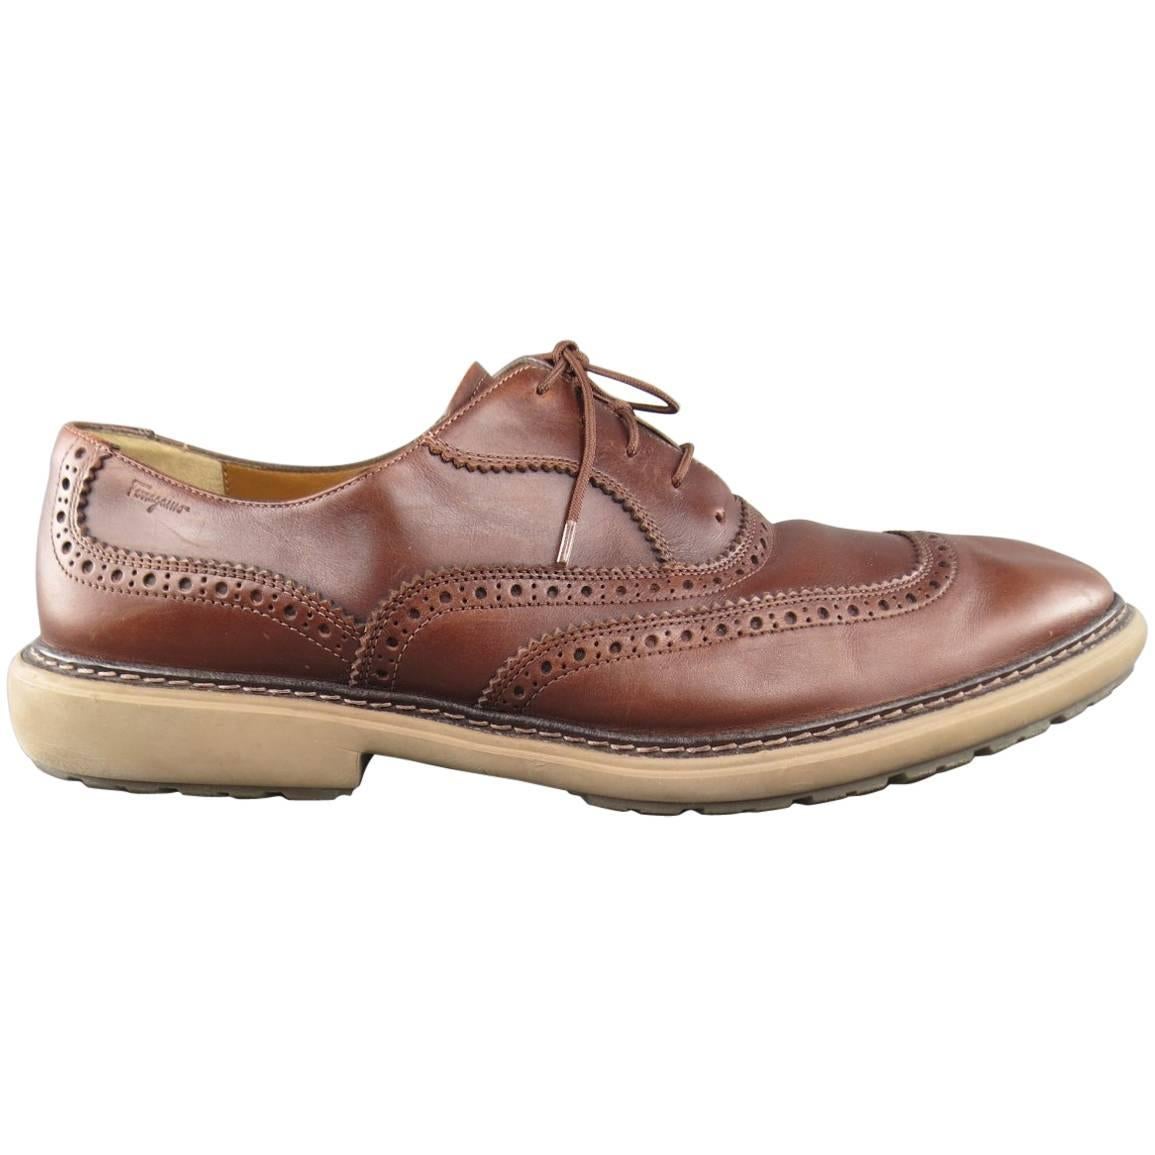 SALVATORE FERRAGAMO Shoes - Brogues Size 11 Brown Leather Rubber Sole Lace Up